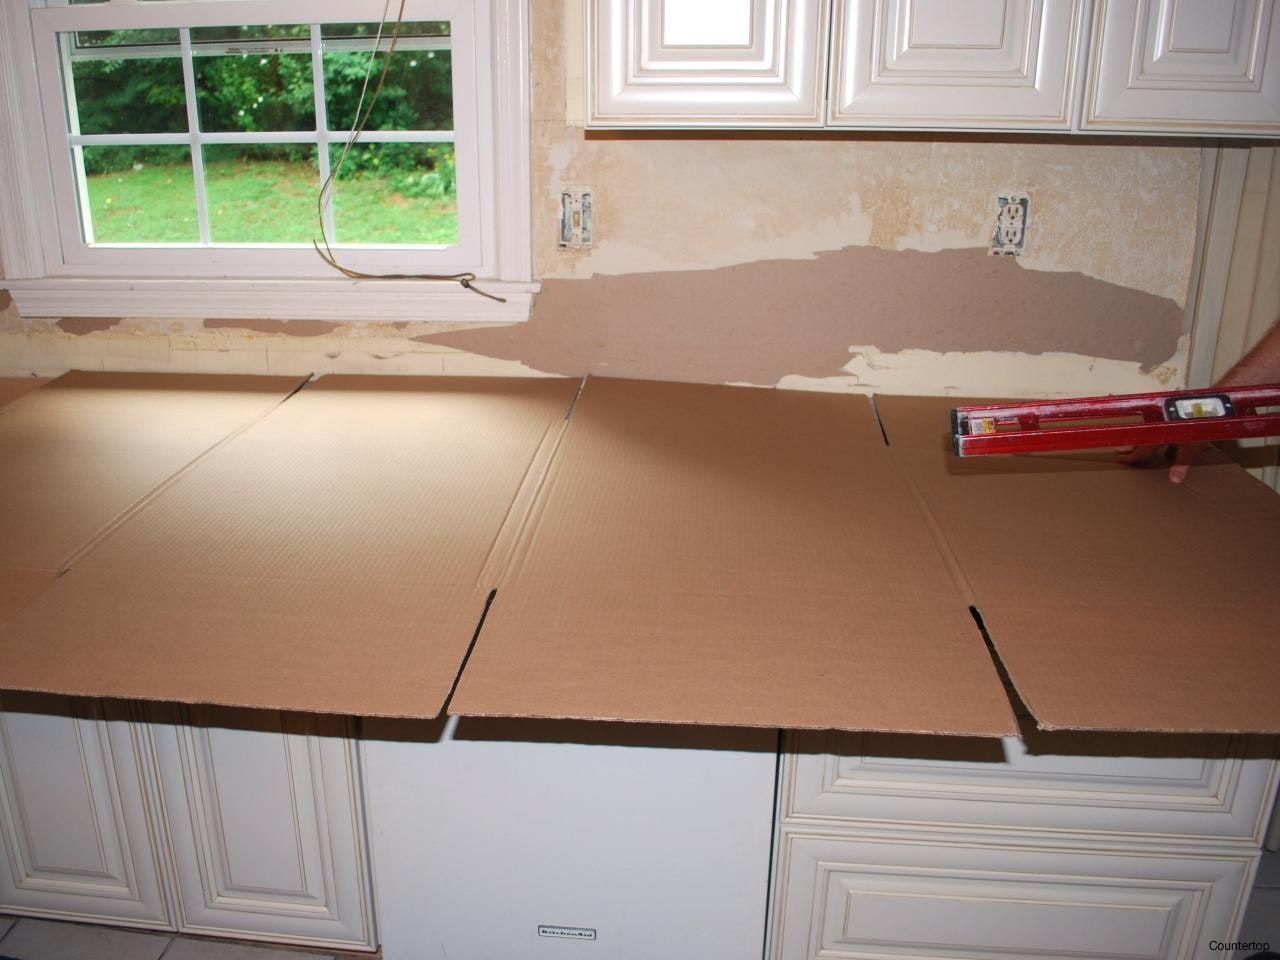 How to support granite countertop over dishwasher